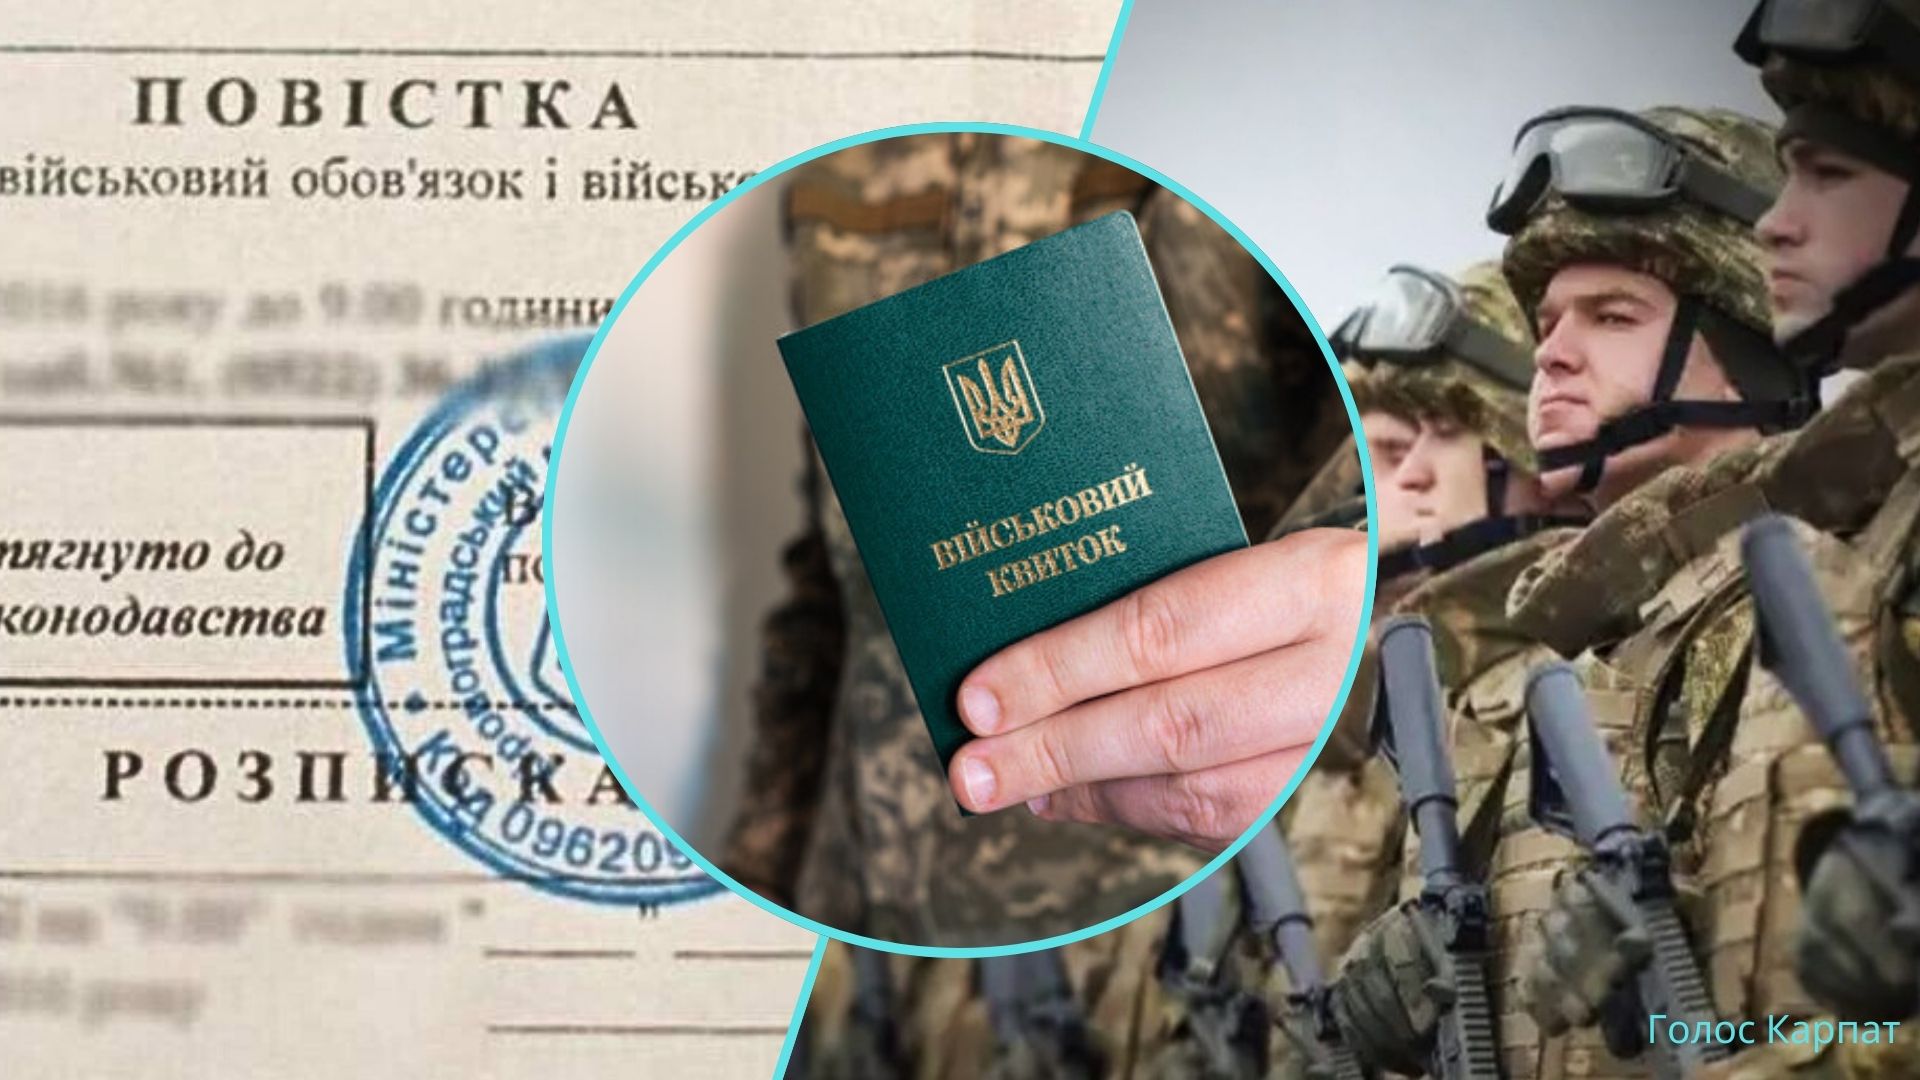 Ukraine intends to establish fines for violation of the rules of military registration and legislation in the field of defense and mobilization.